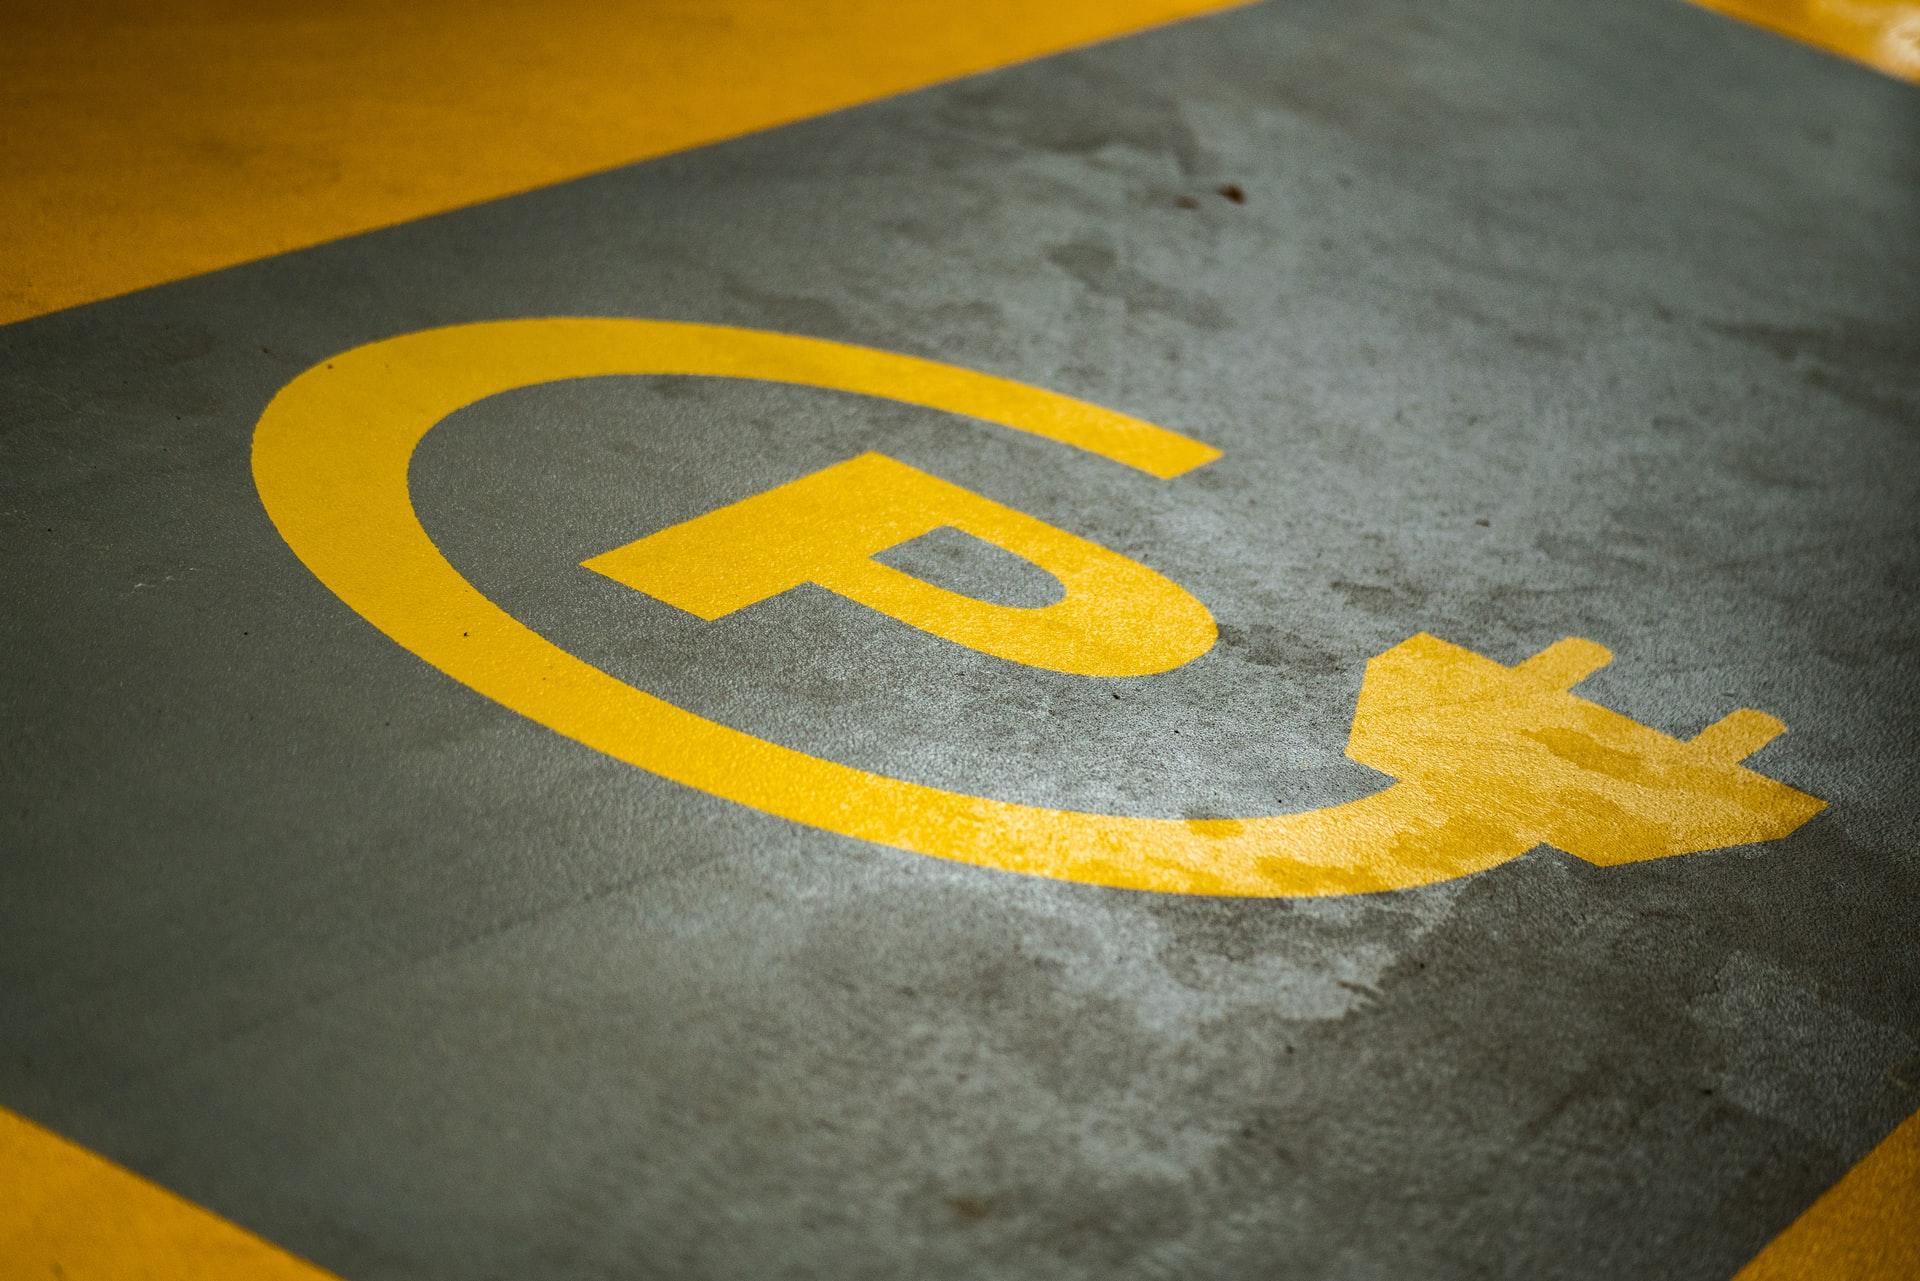 Accessible charging is one of the most important things for EV adoption.